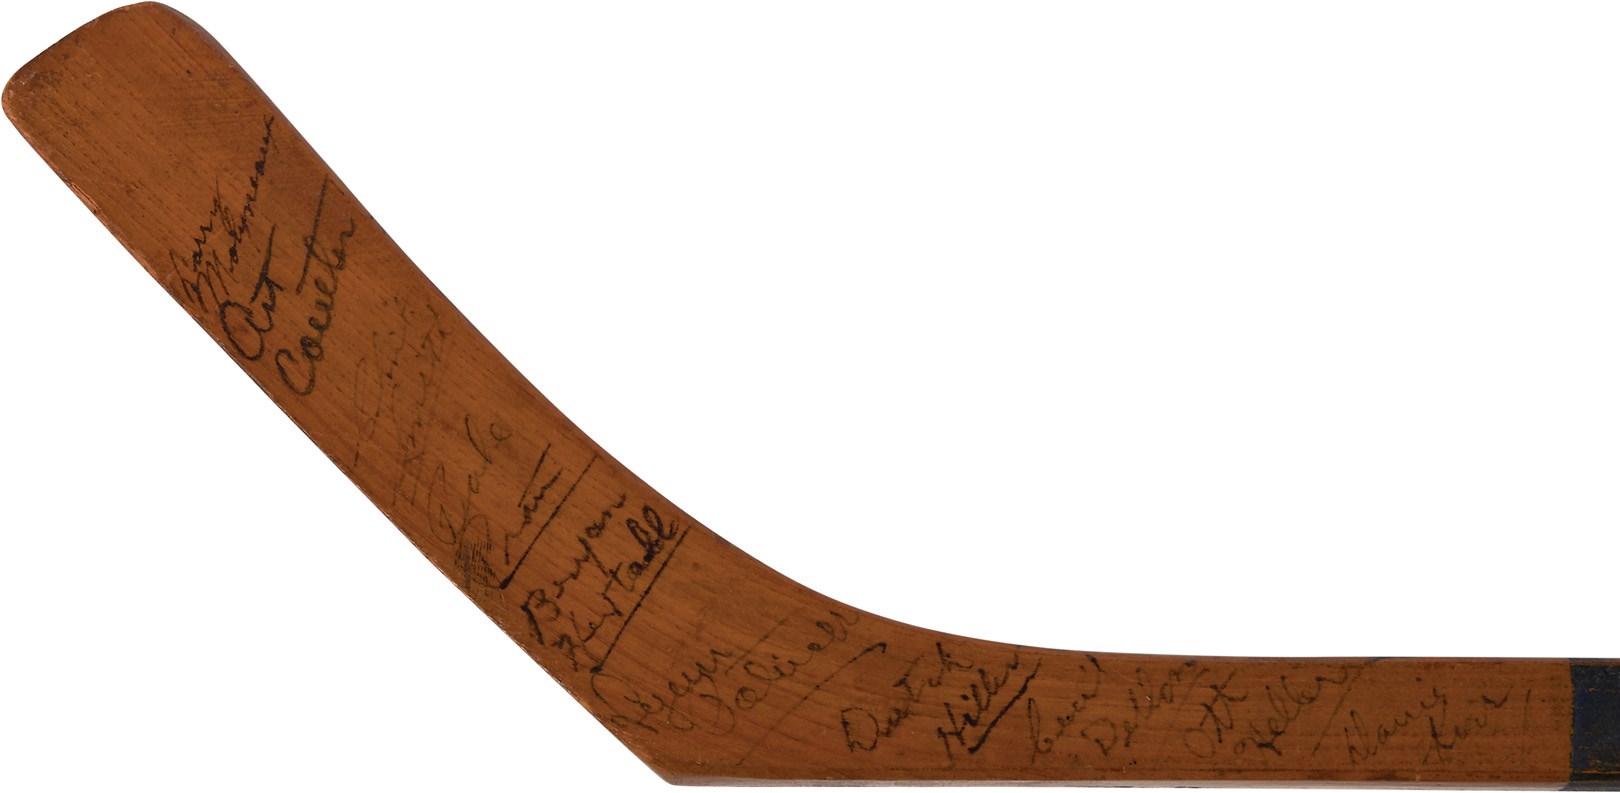 - 1940 Stanley Cup Teams-Signed Mini Stick From The Patrick Family (PSA)